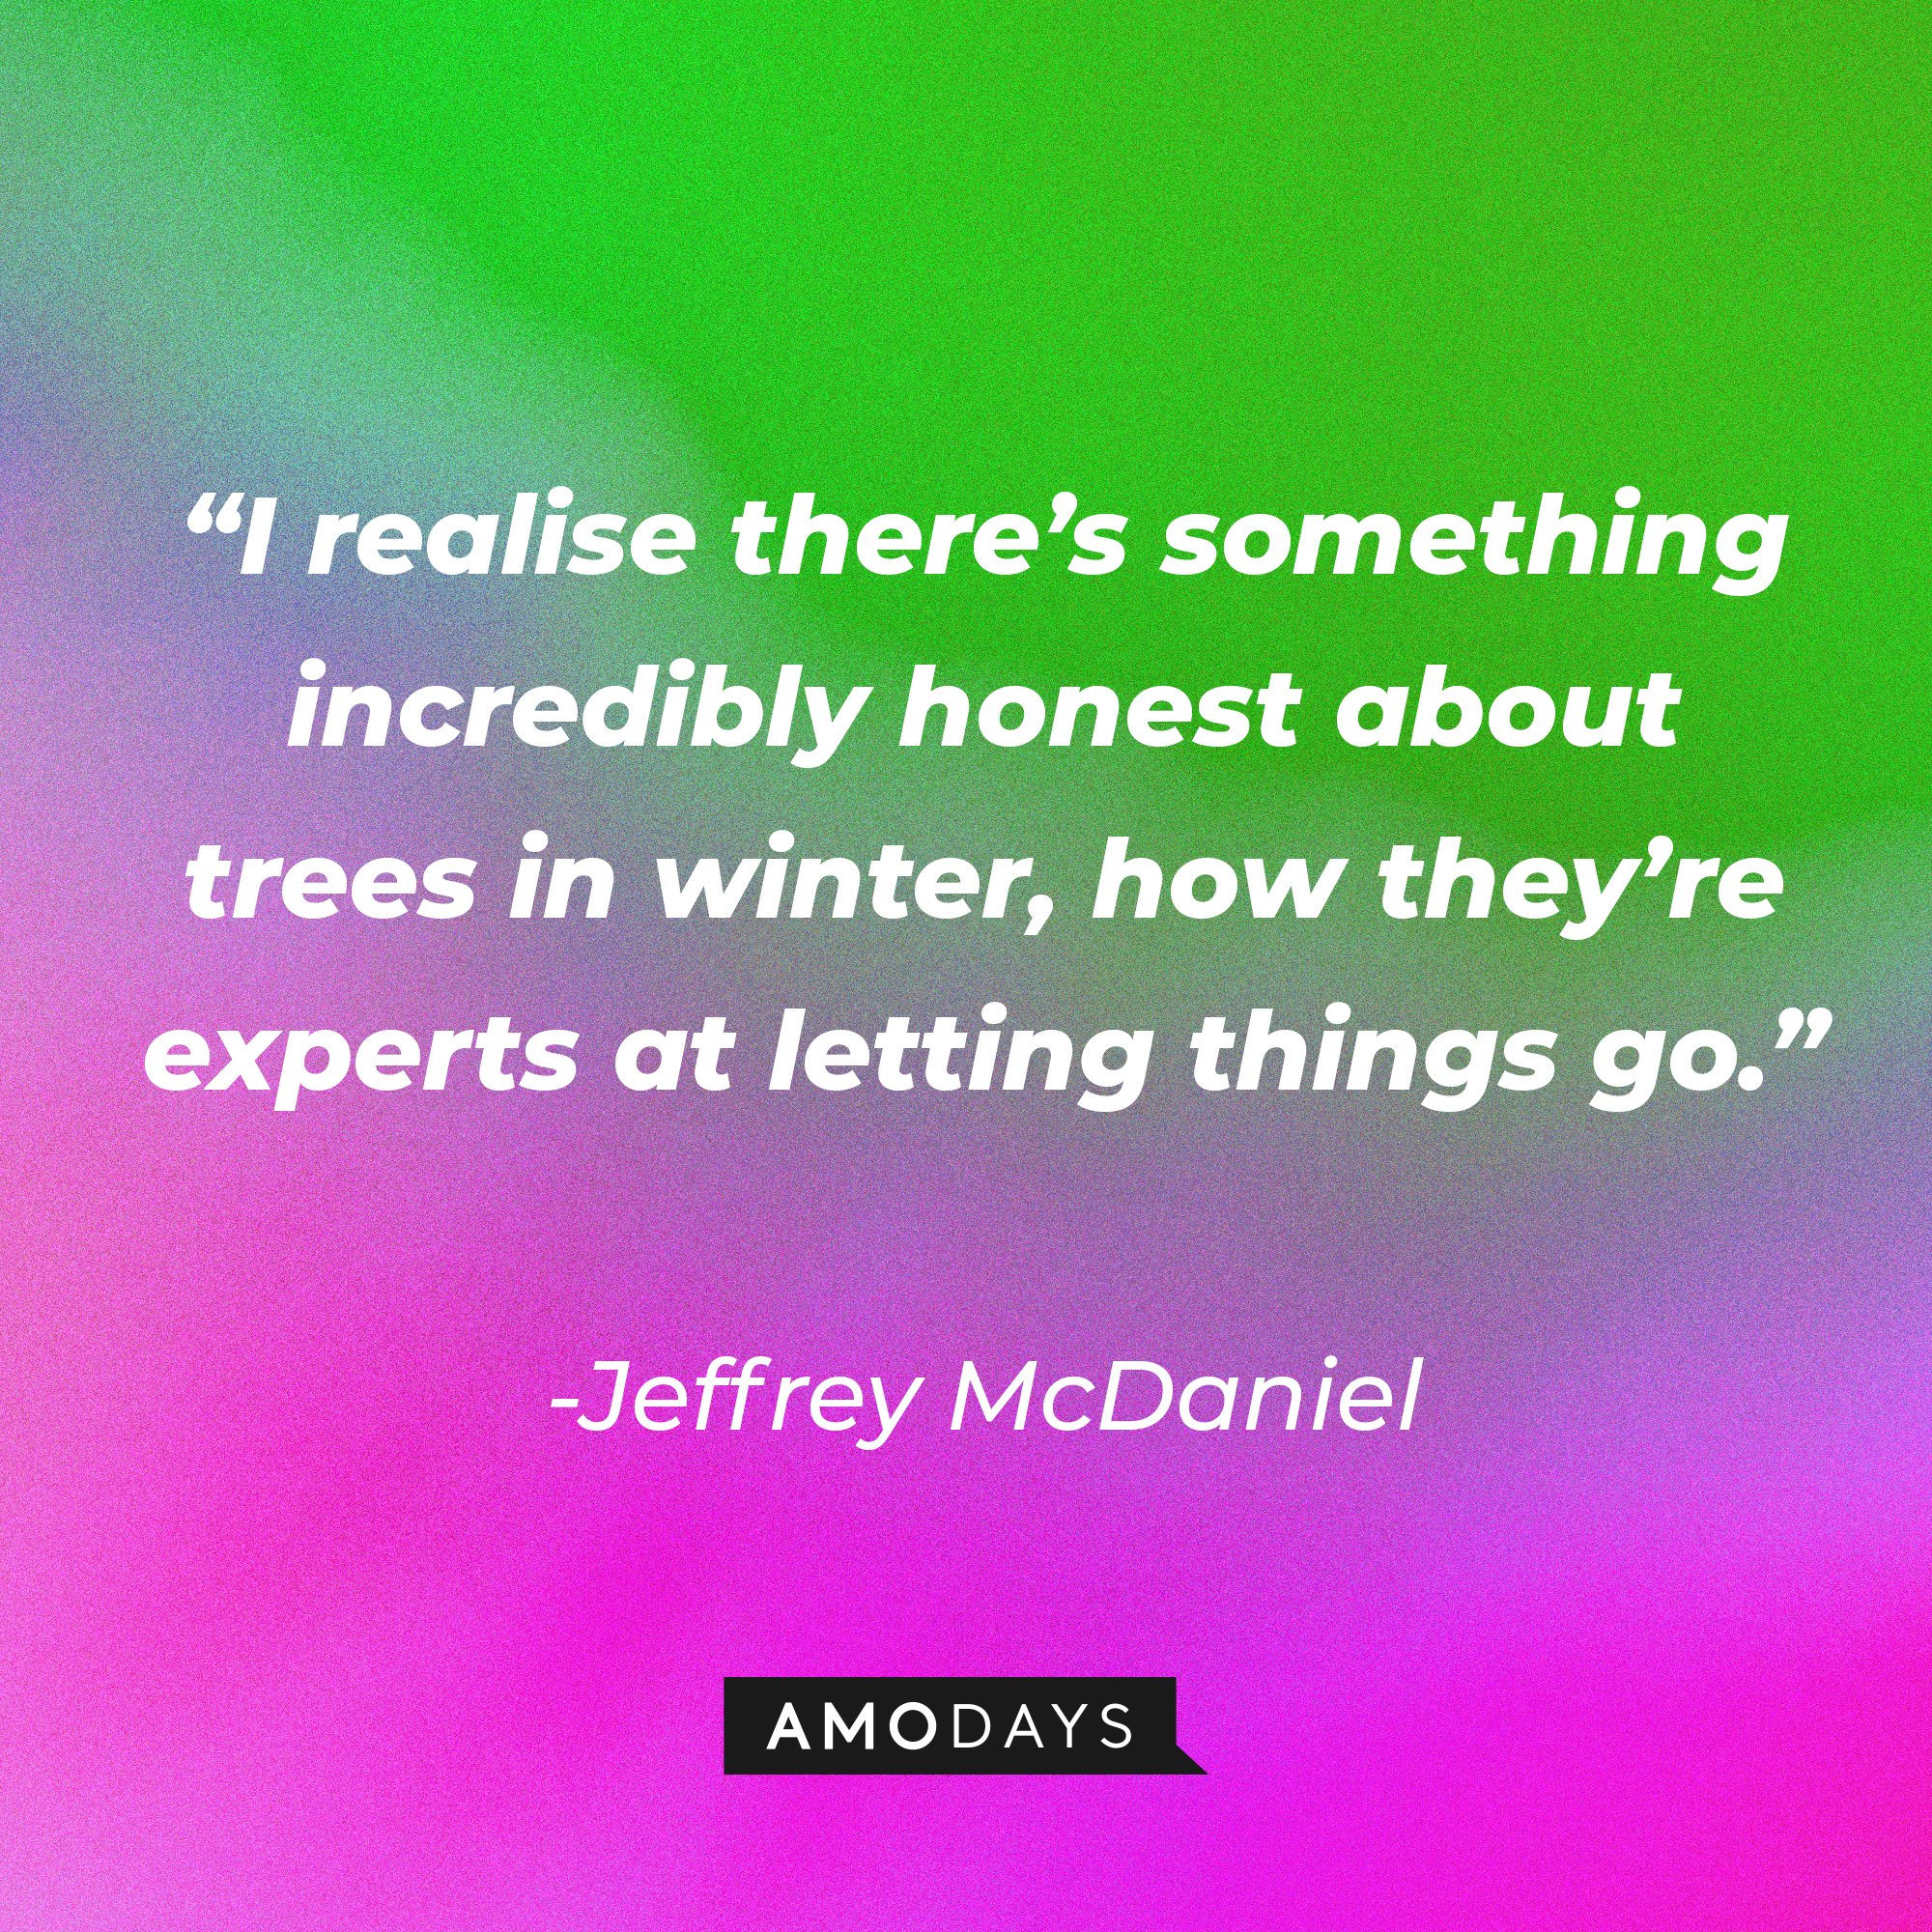 Jeffrey McDaniel's quote: “I realise there’s something incredibly honest about trees in winter, how they’re experts at letting things go.” | Image: AmoDays